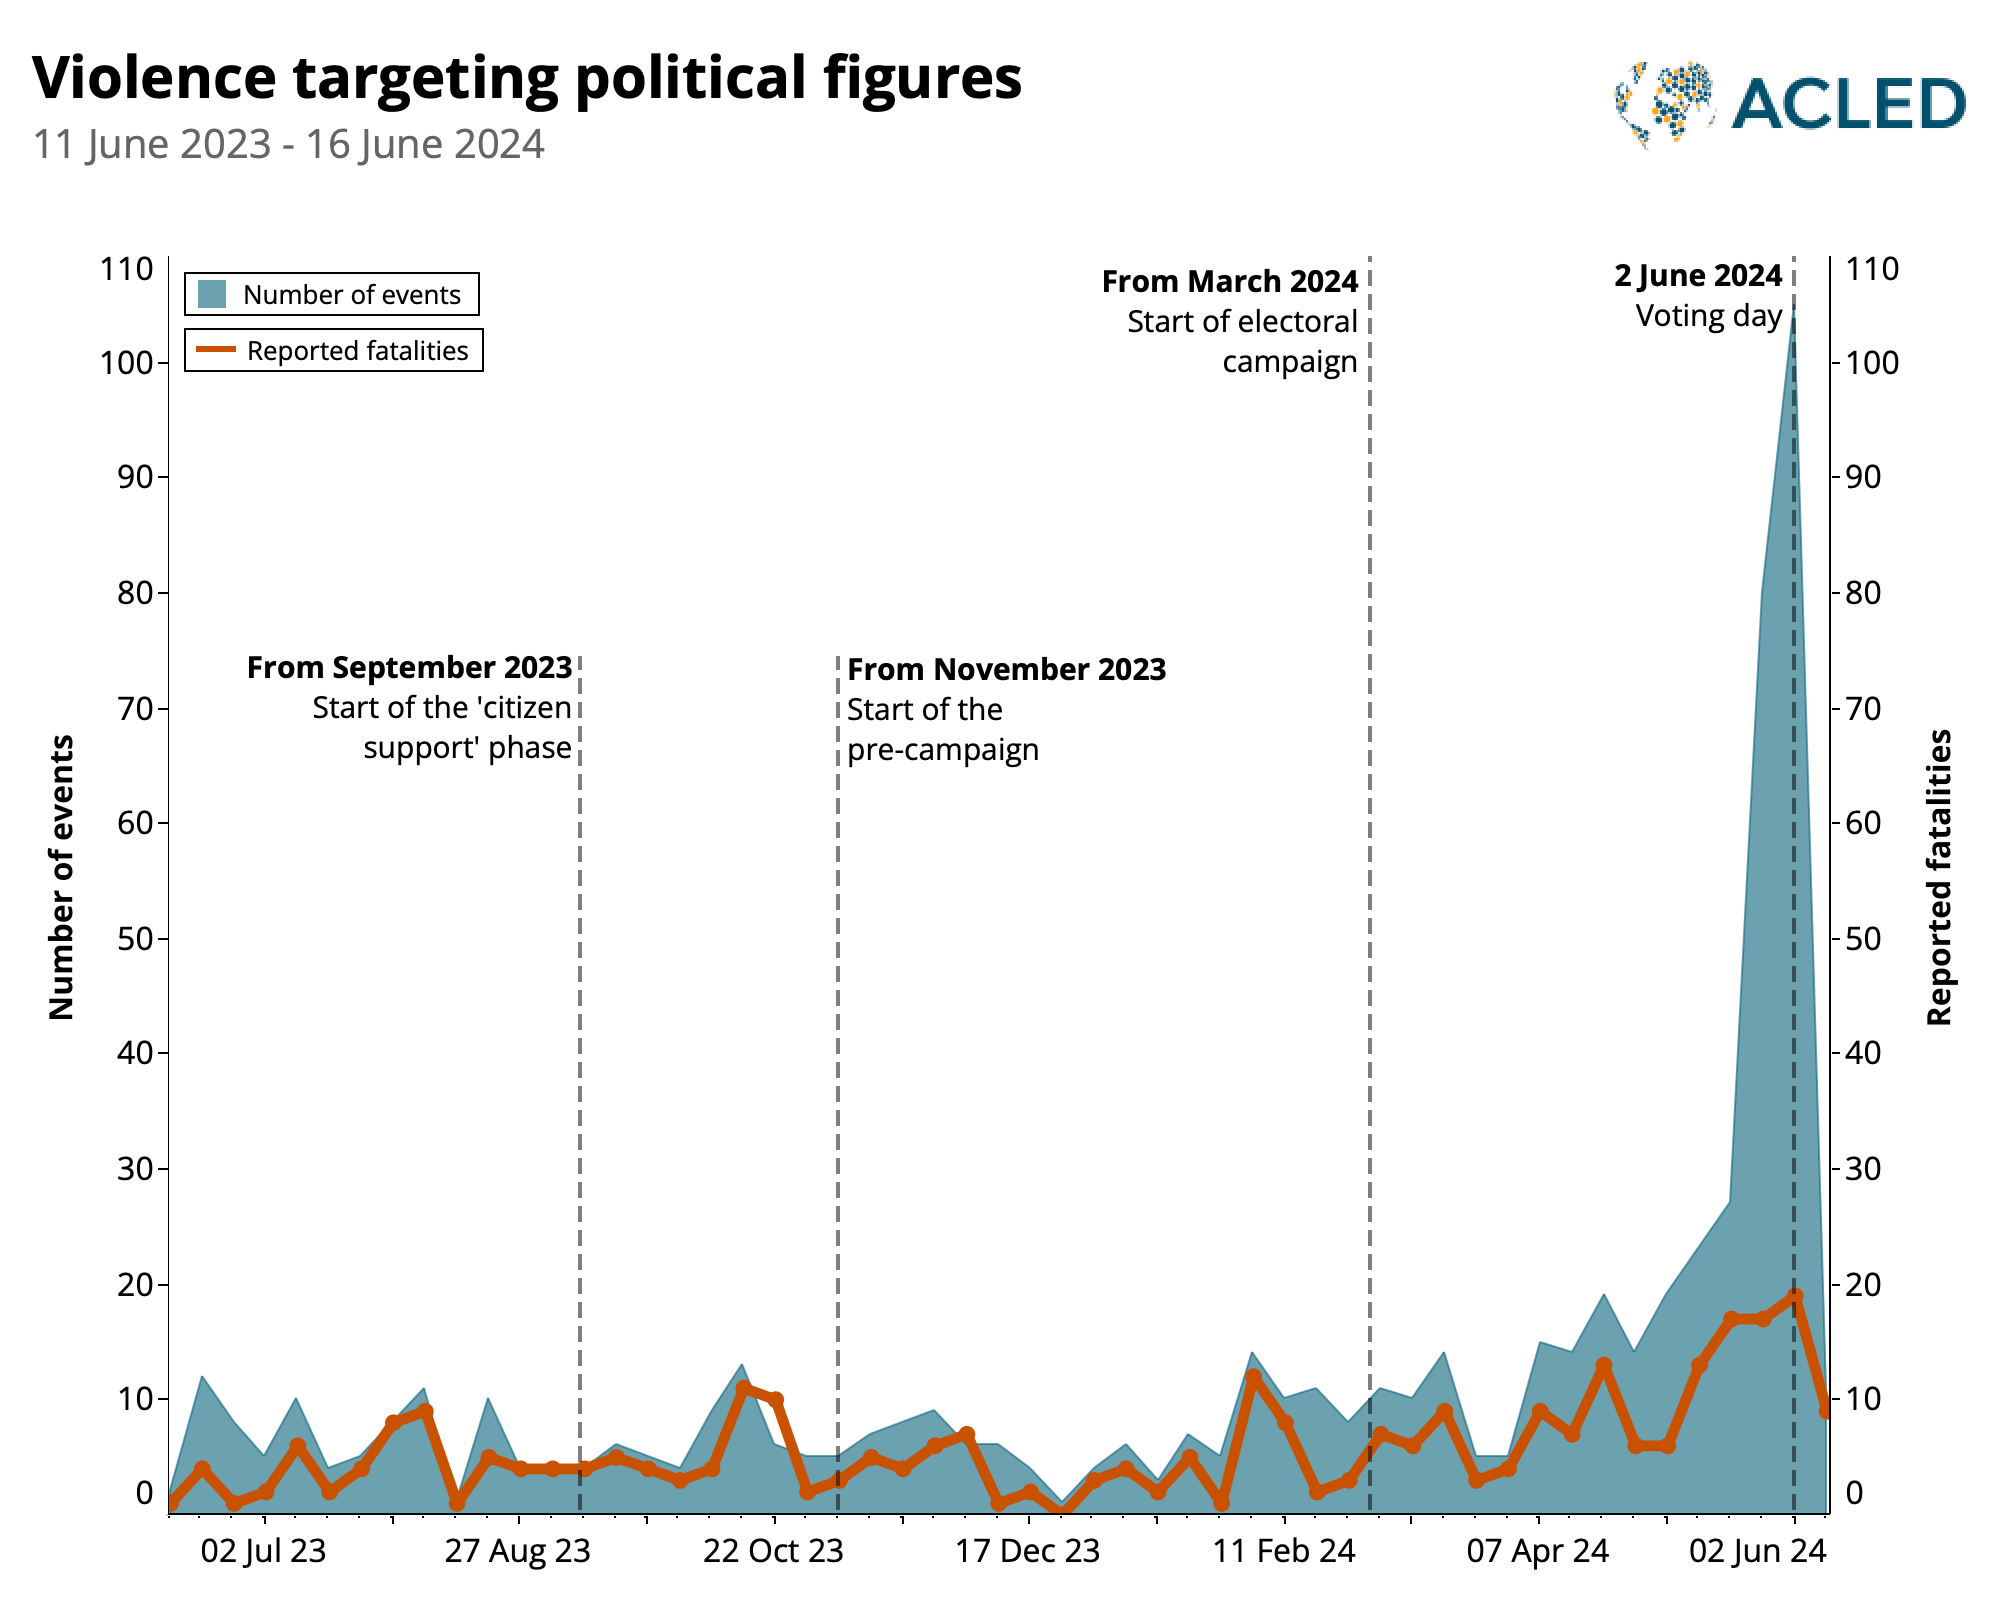 Combined chart - Violence targeting political figures 11 June 2023 to 16 June 2024